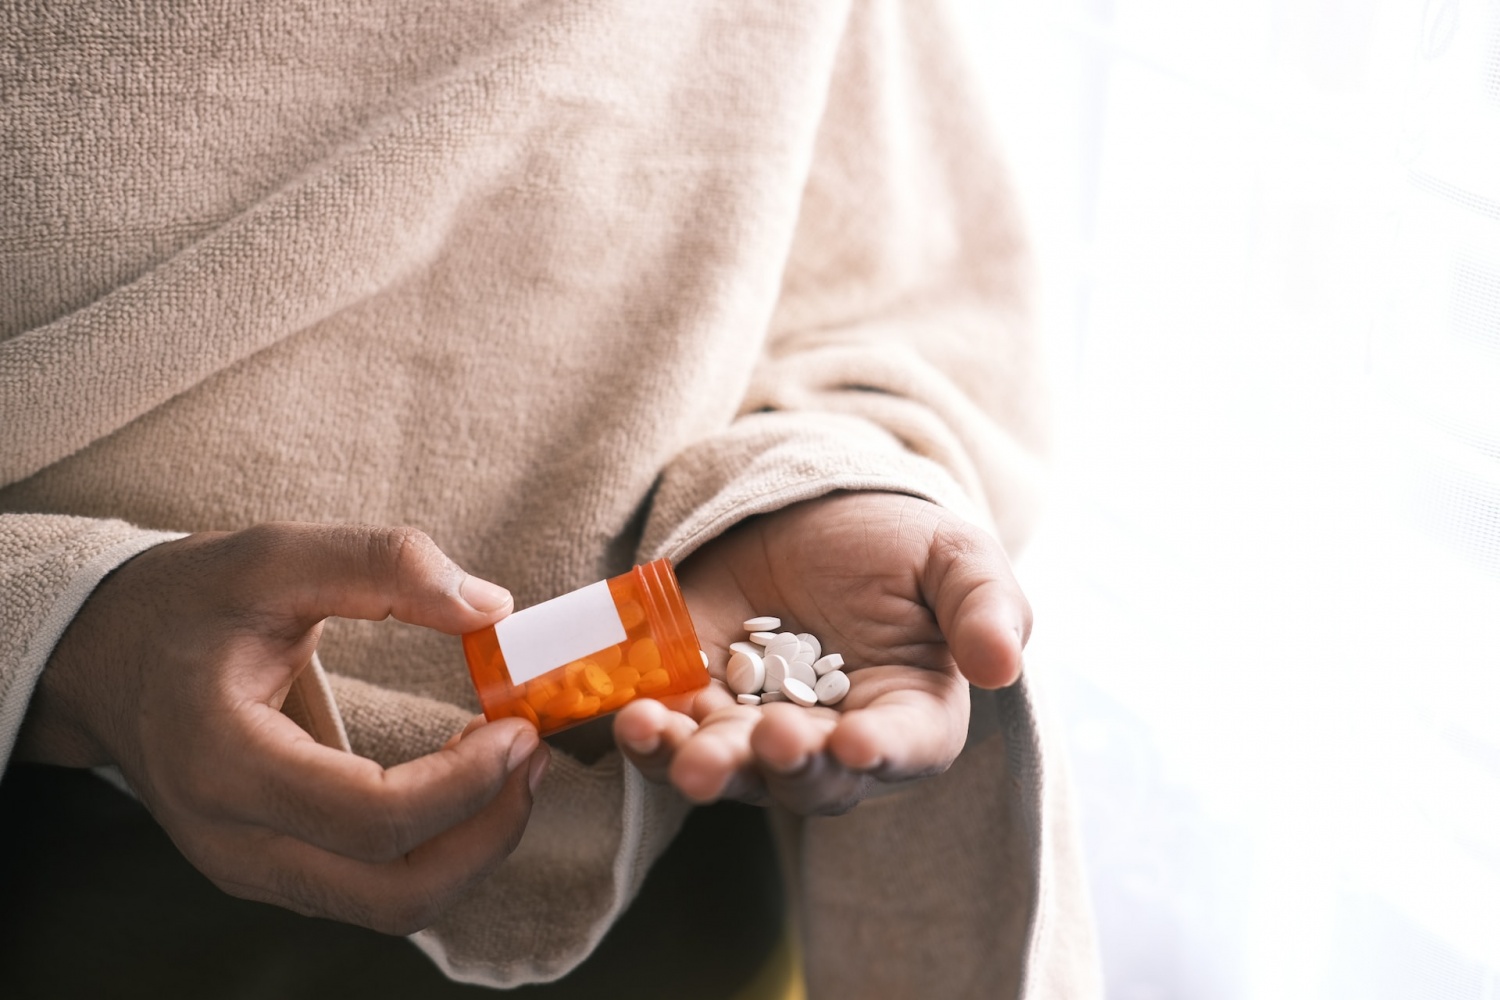 How Effective Is Xanax in Treating Anxiety?